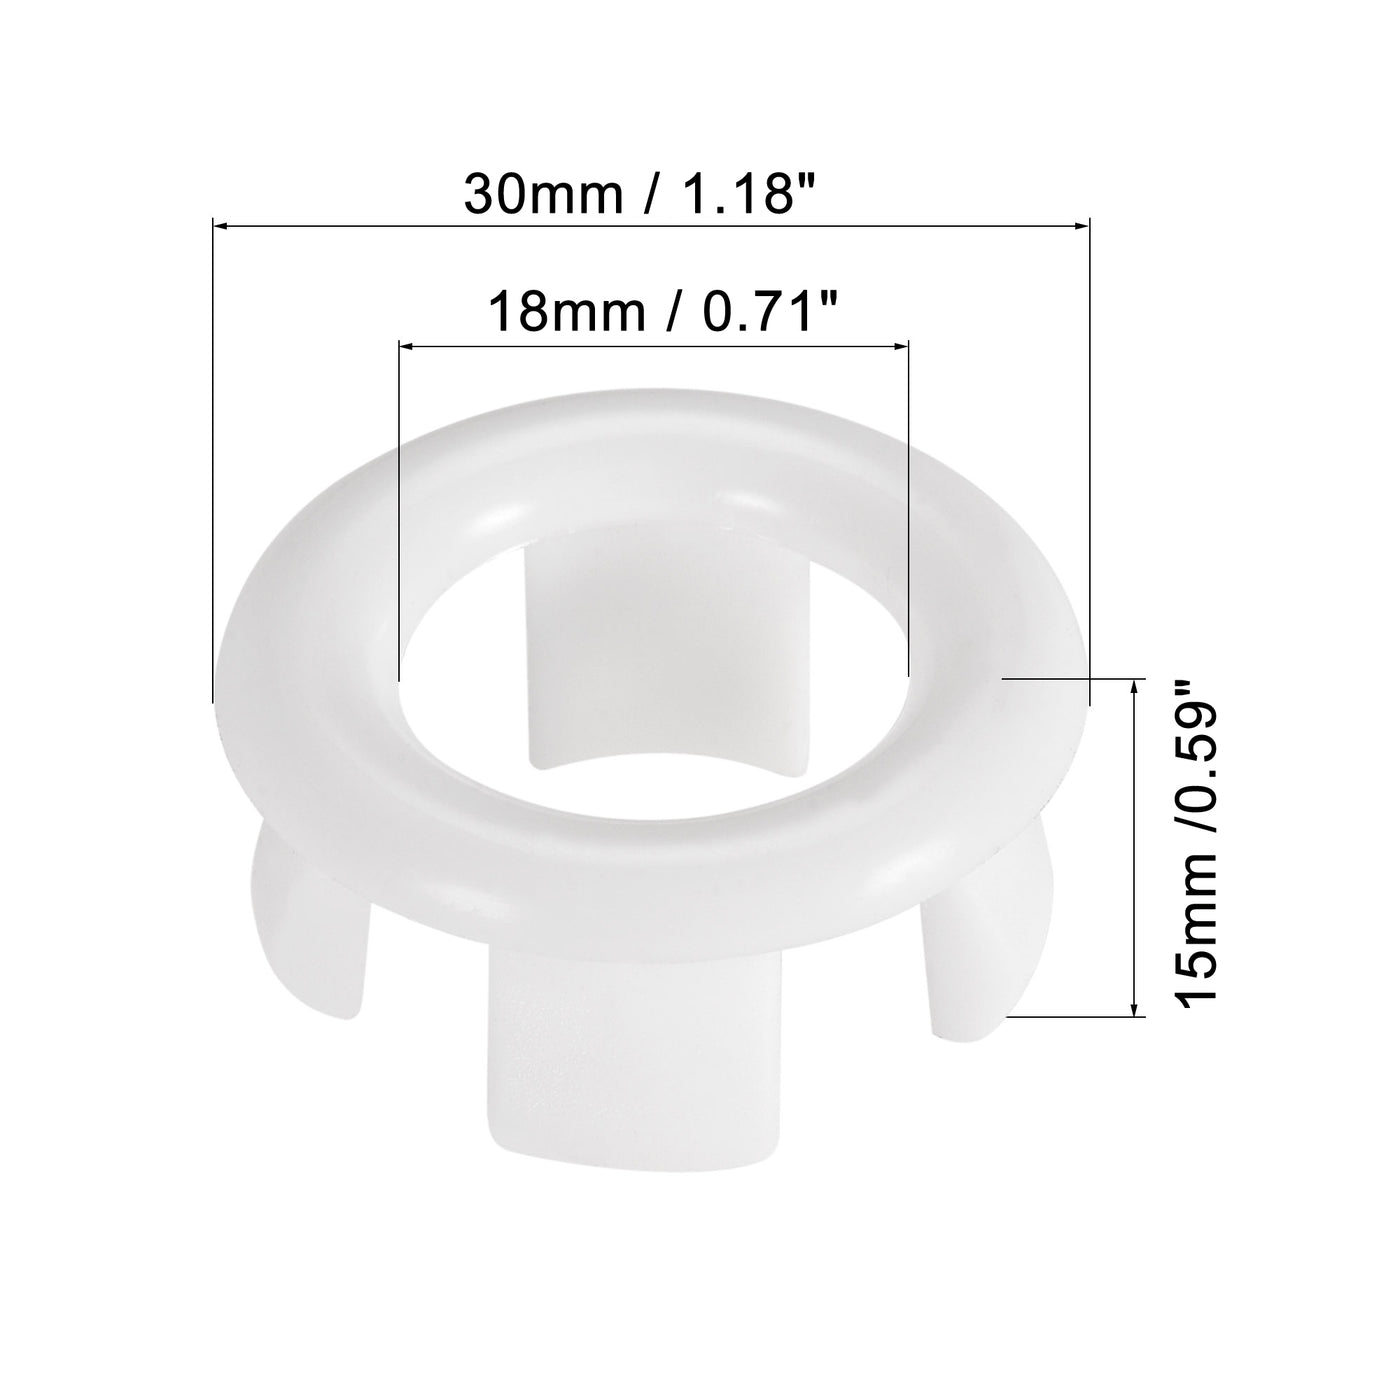 uxcell Uxcell Sink Basin Trim Overflow Cover Insert in Hole Ring Covers Caps White 6pcs